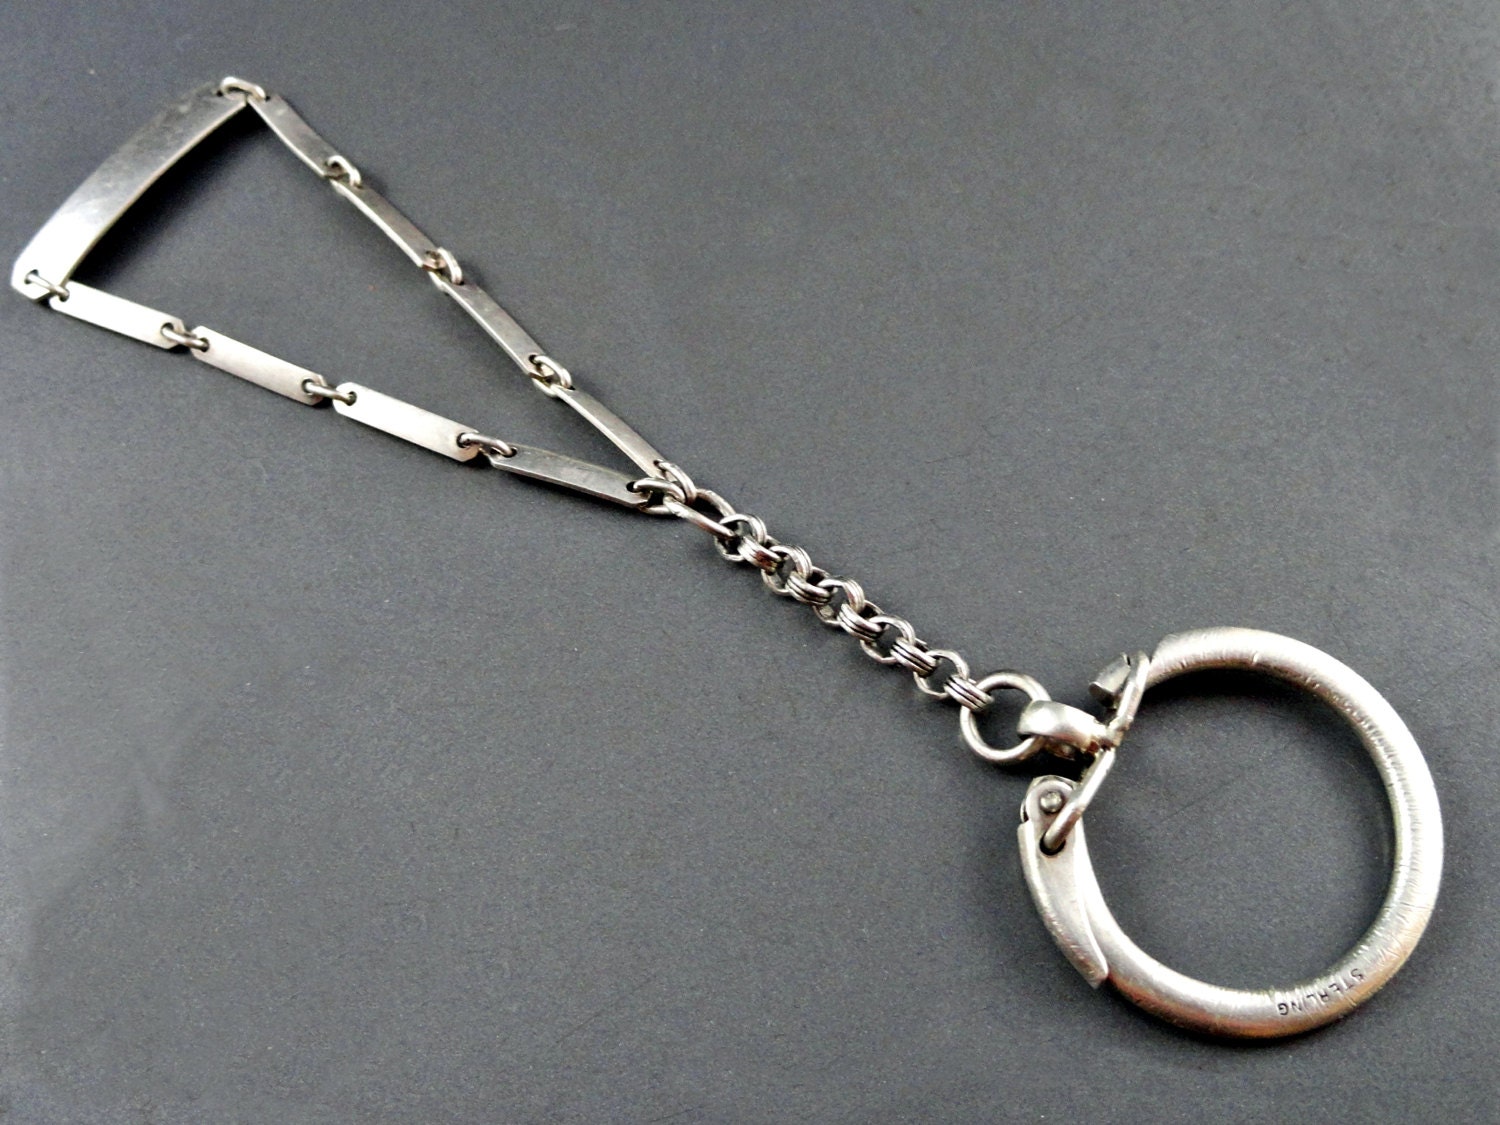 Sterling Silver Keychain Vintage Key Ring with Unusual Link and Bar